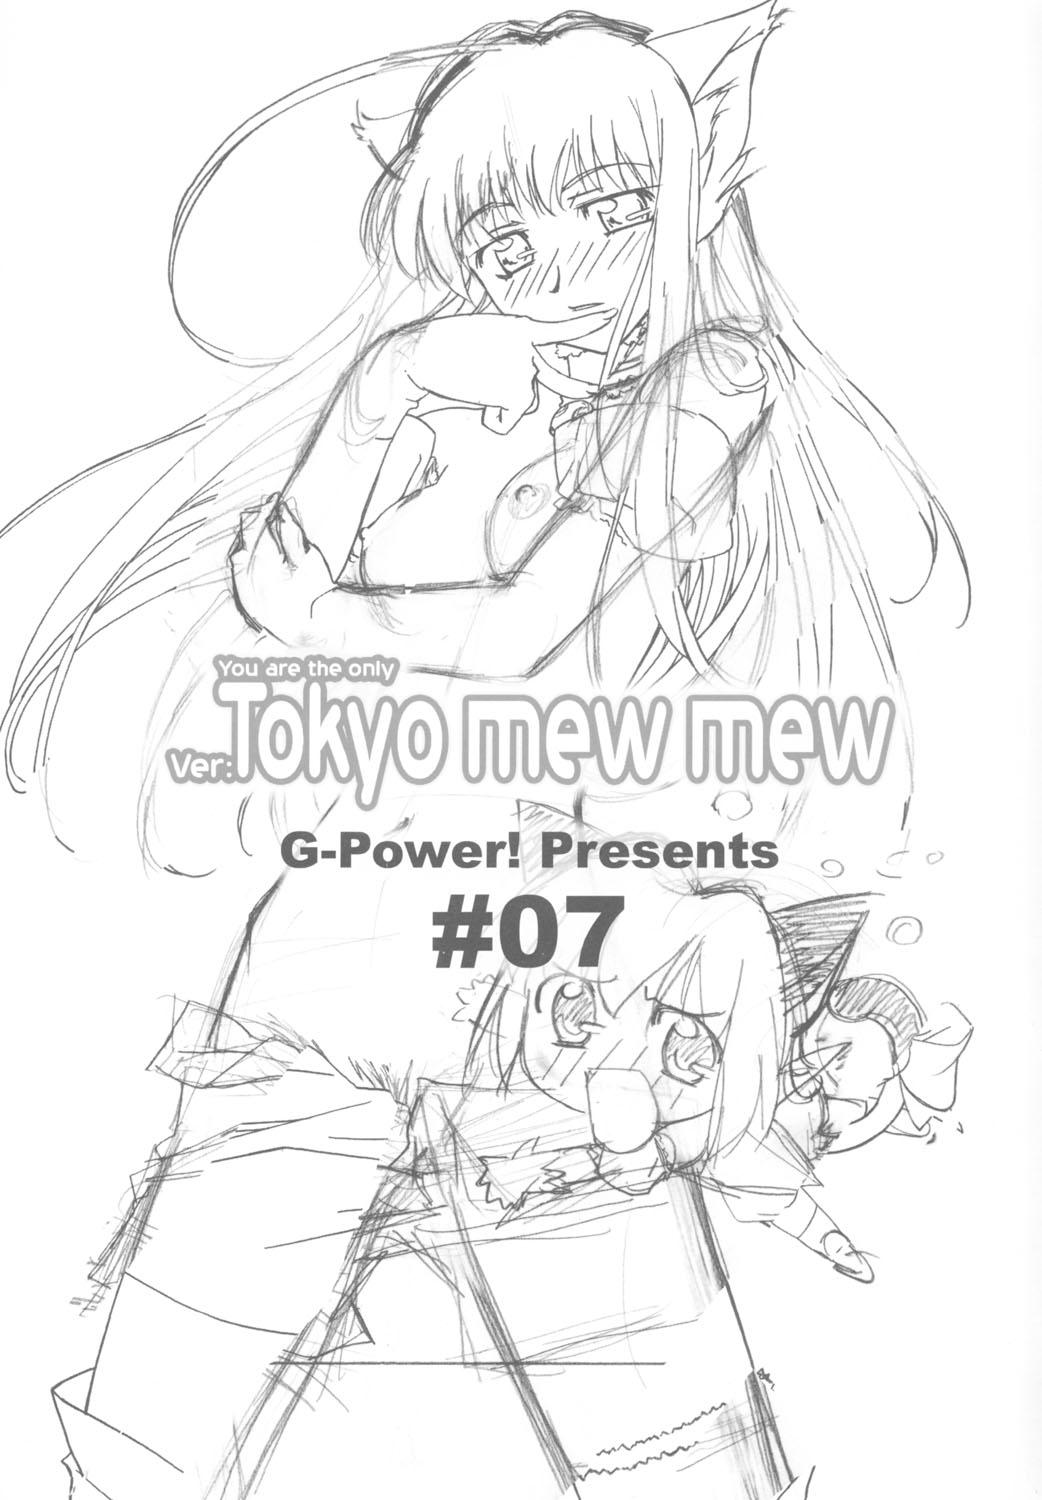 Blowjob Contest YOU ARE THE ONLY version:Tokyo mew mew - Tokyo mew mew Mamada - Picture 2